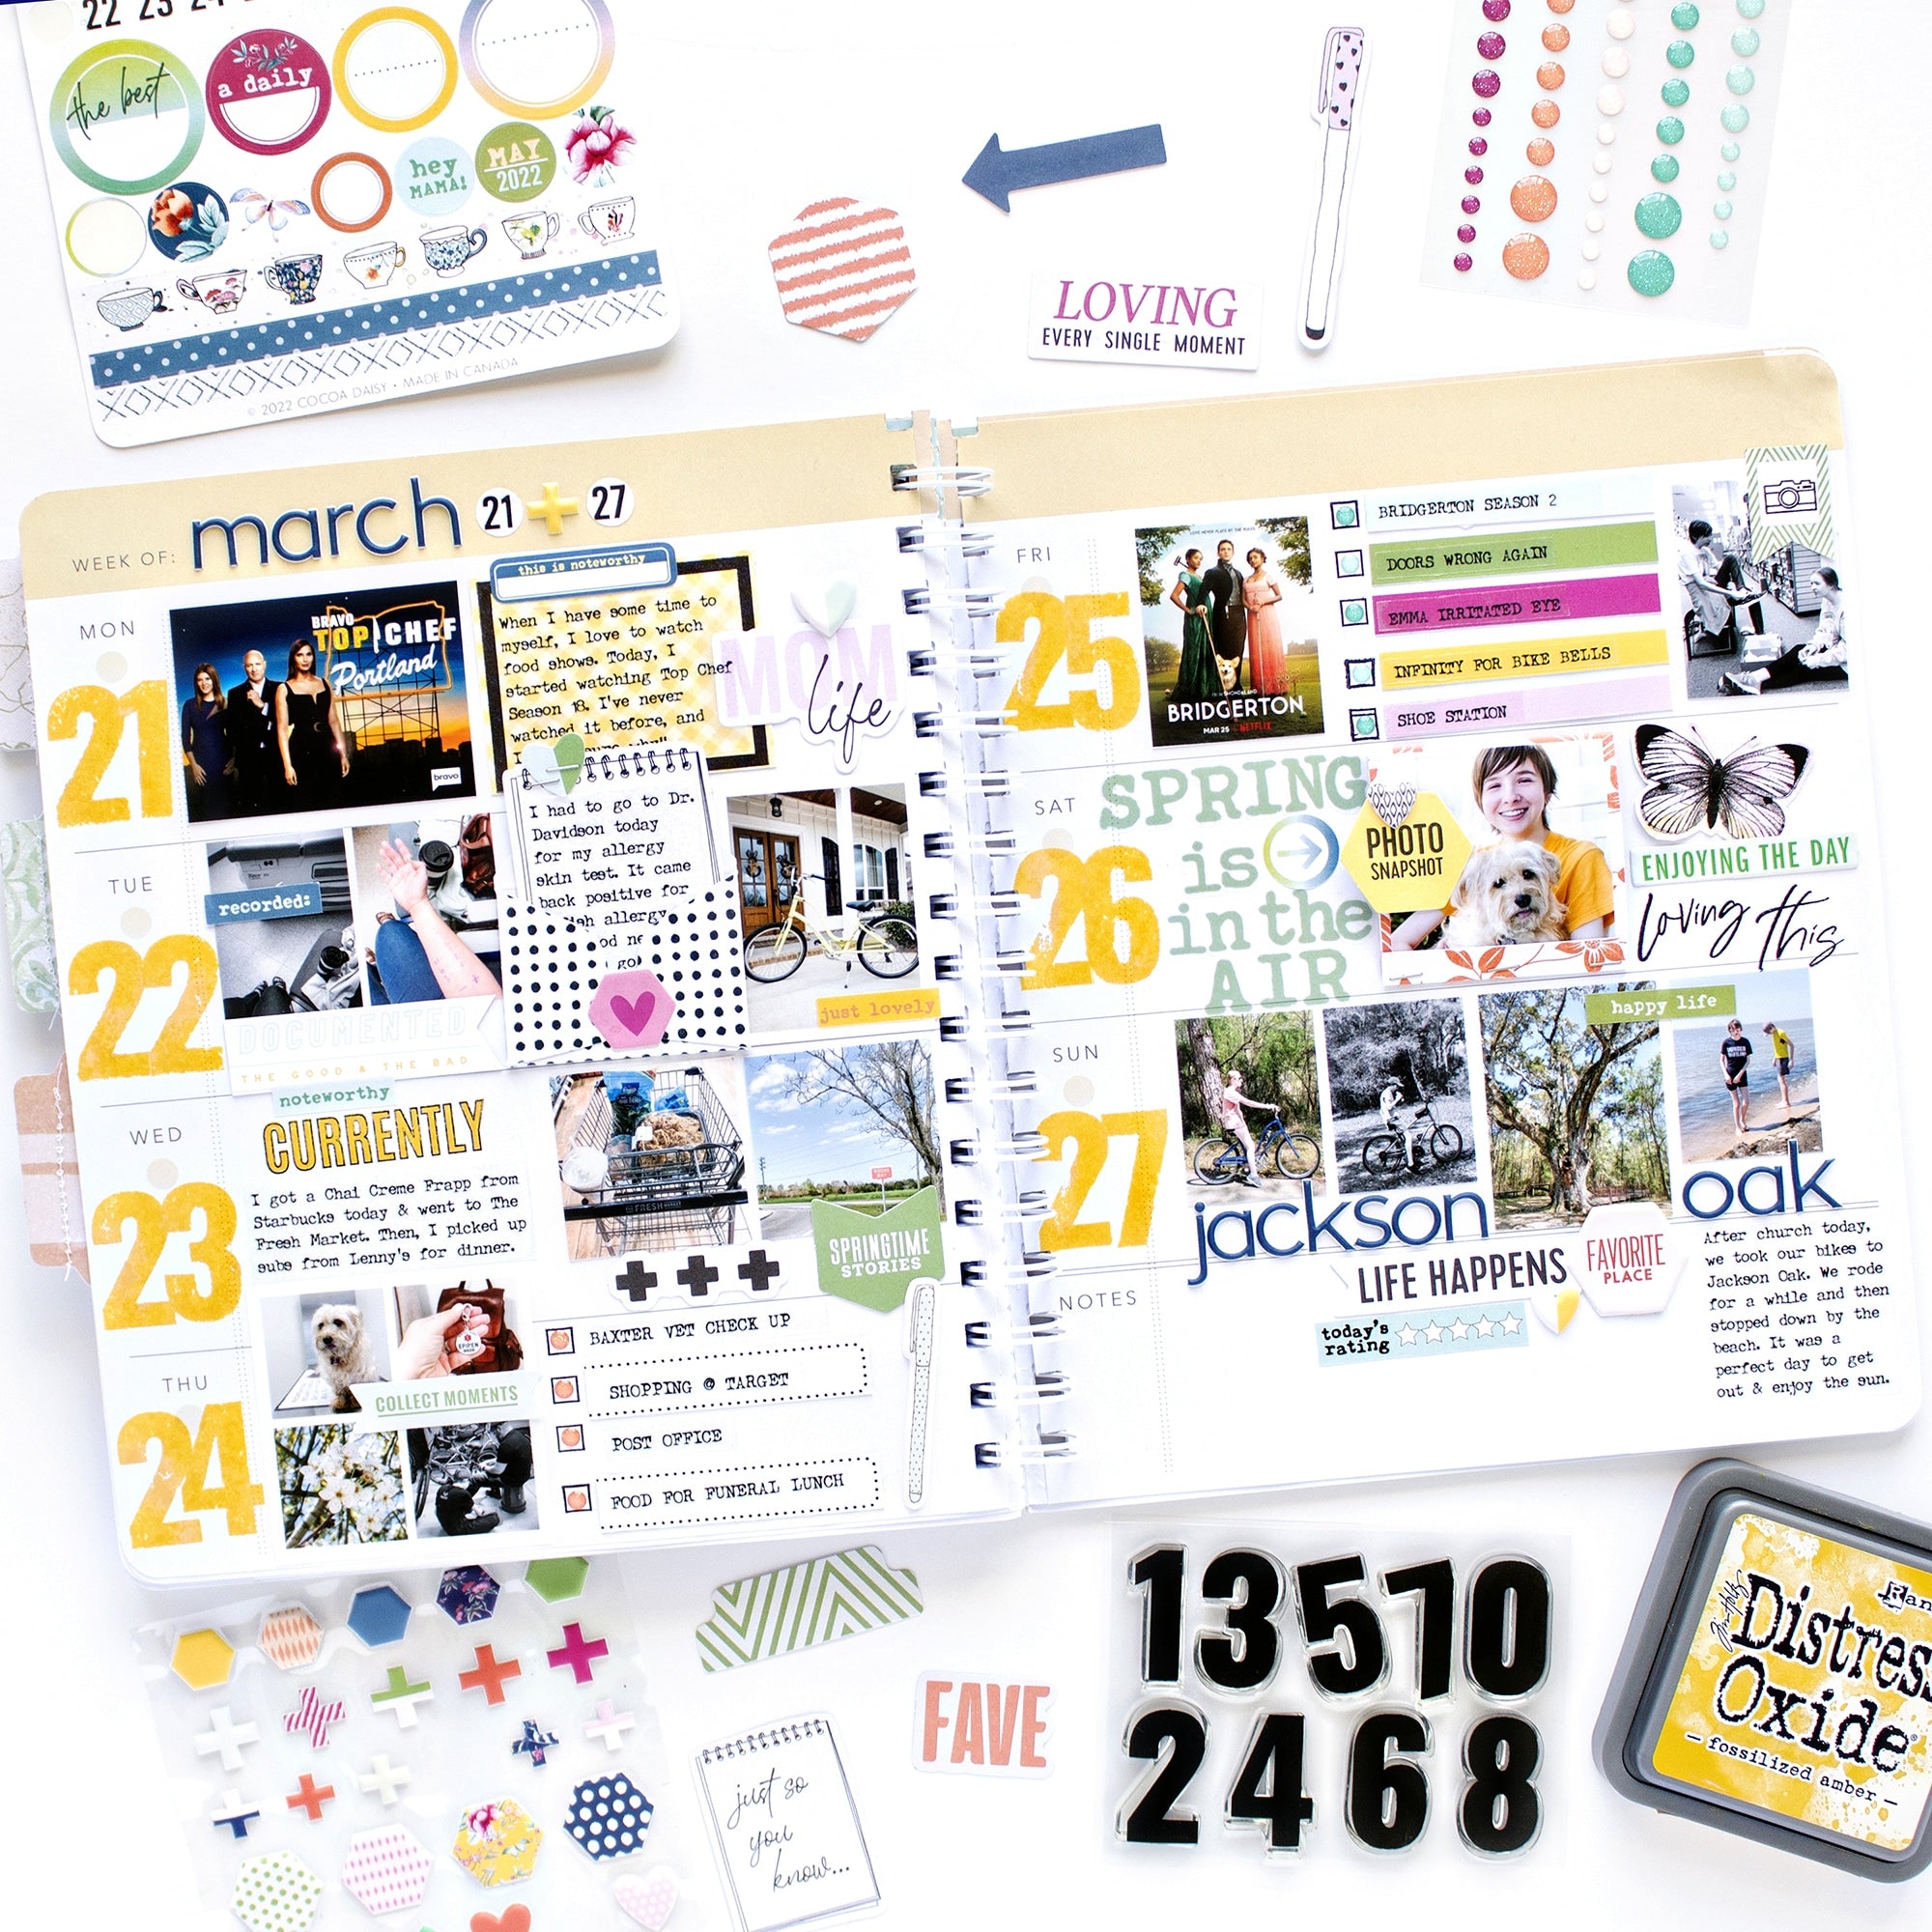 Lesson 4: Using Scrapbooking Supplies in Your Memory Planner